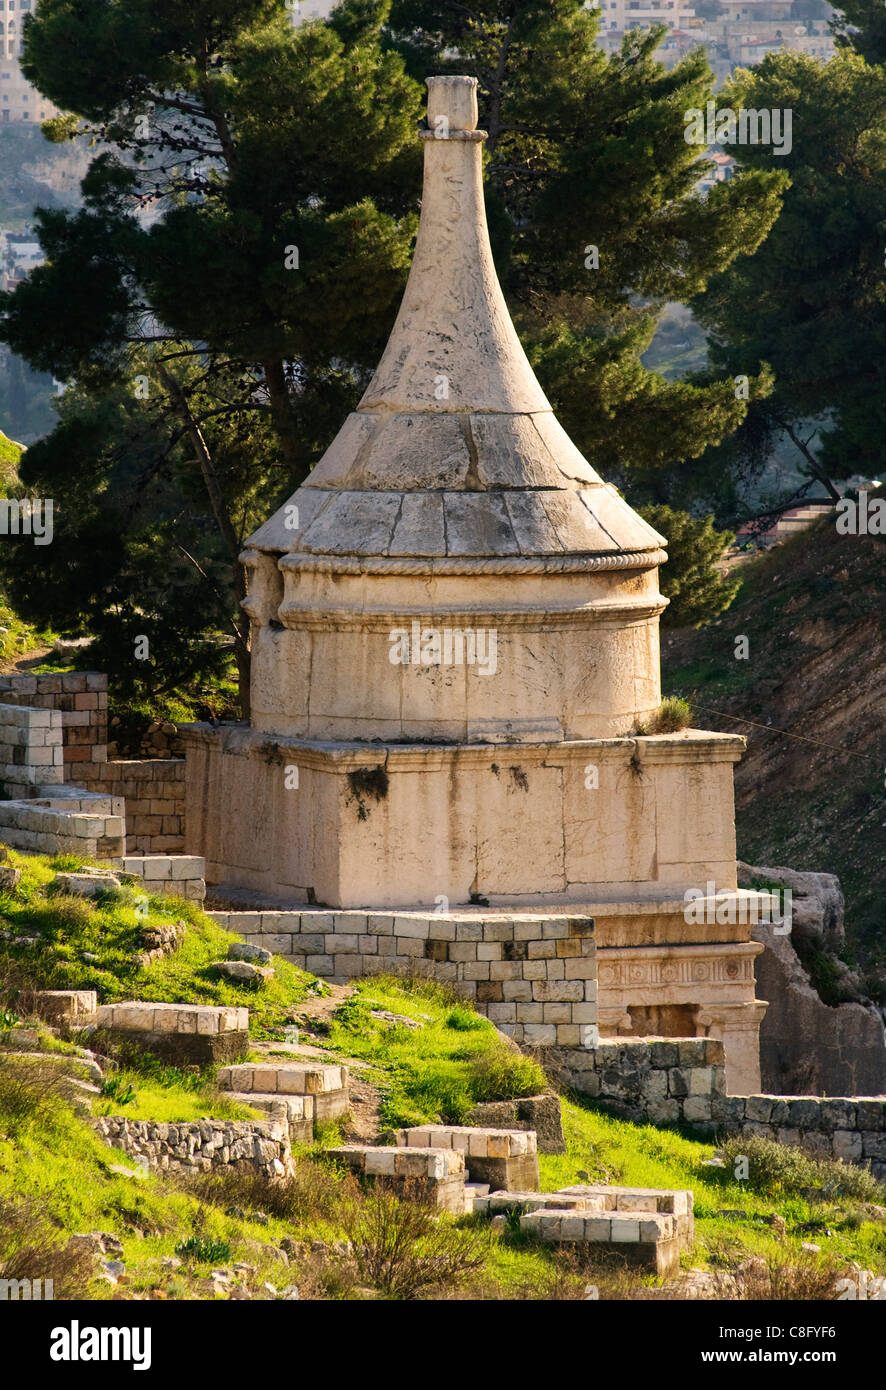 View of the tomb of Absalom, also called Absalom's Pillar, which is an ancient monumental rock-cut tomb with a conical roof dating to the 1st century AD located in the Kidron Valley or Wadi an-Nar in Jerusalem, Israel Stock Photo